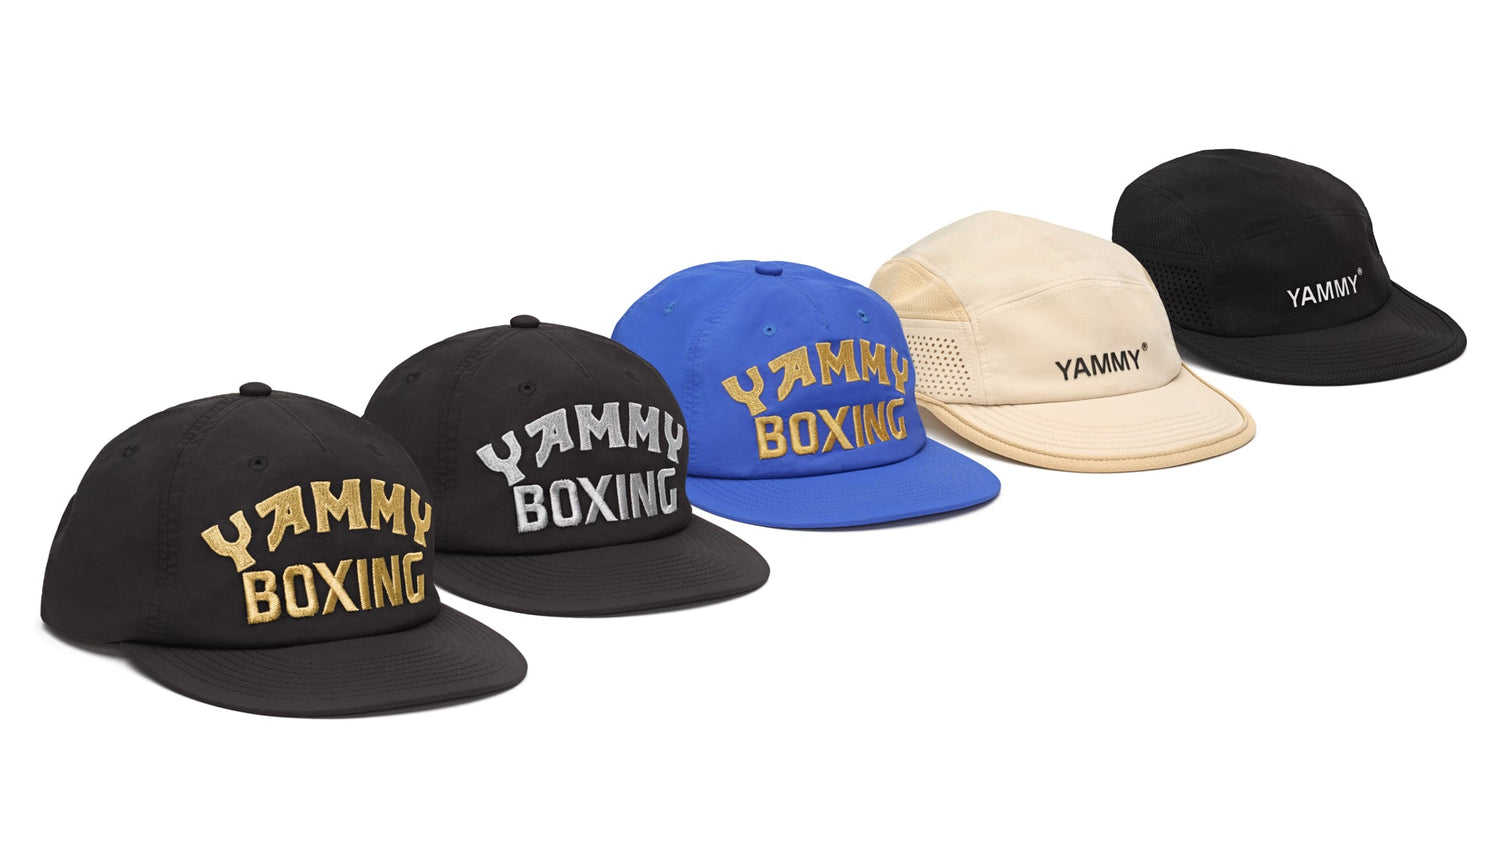 YAMMY Boxing Caps Banner